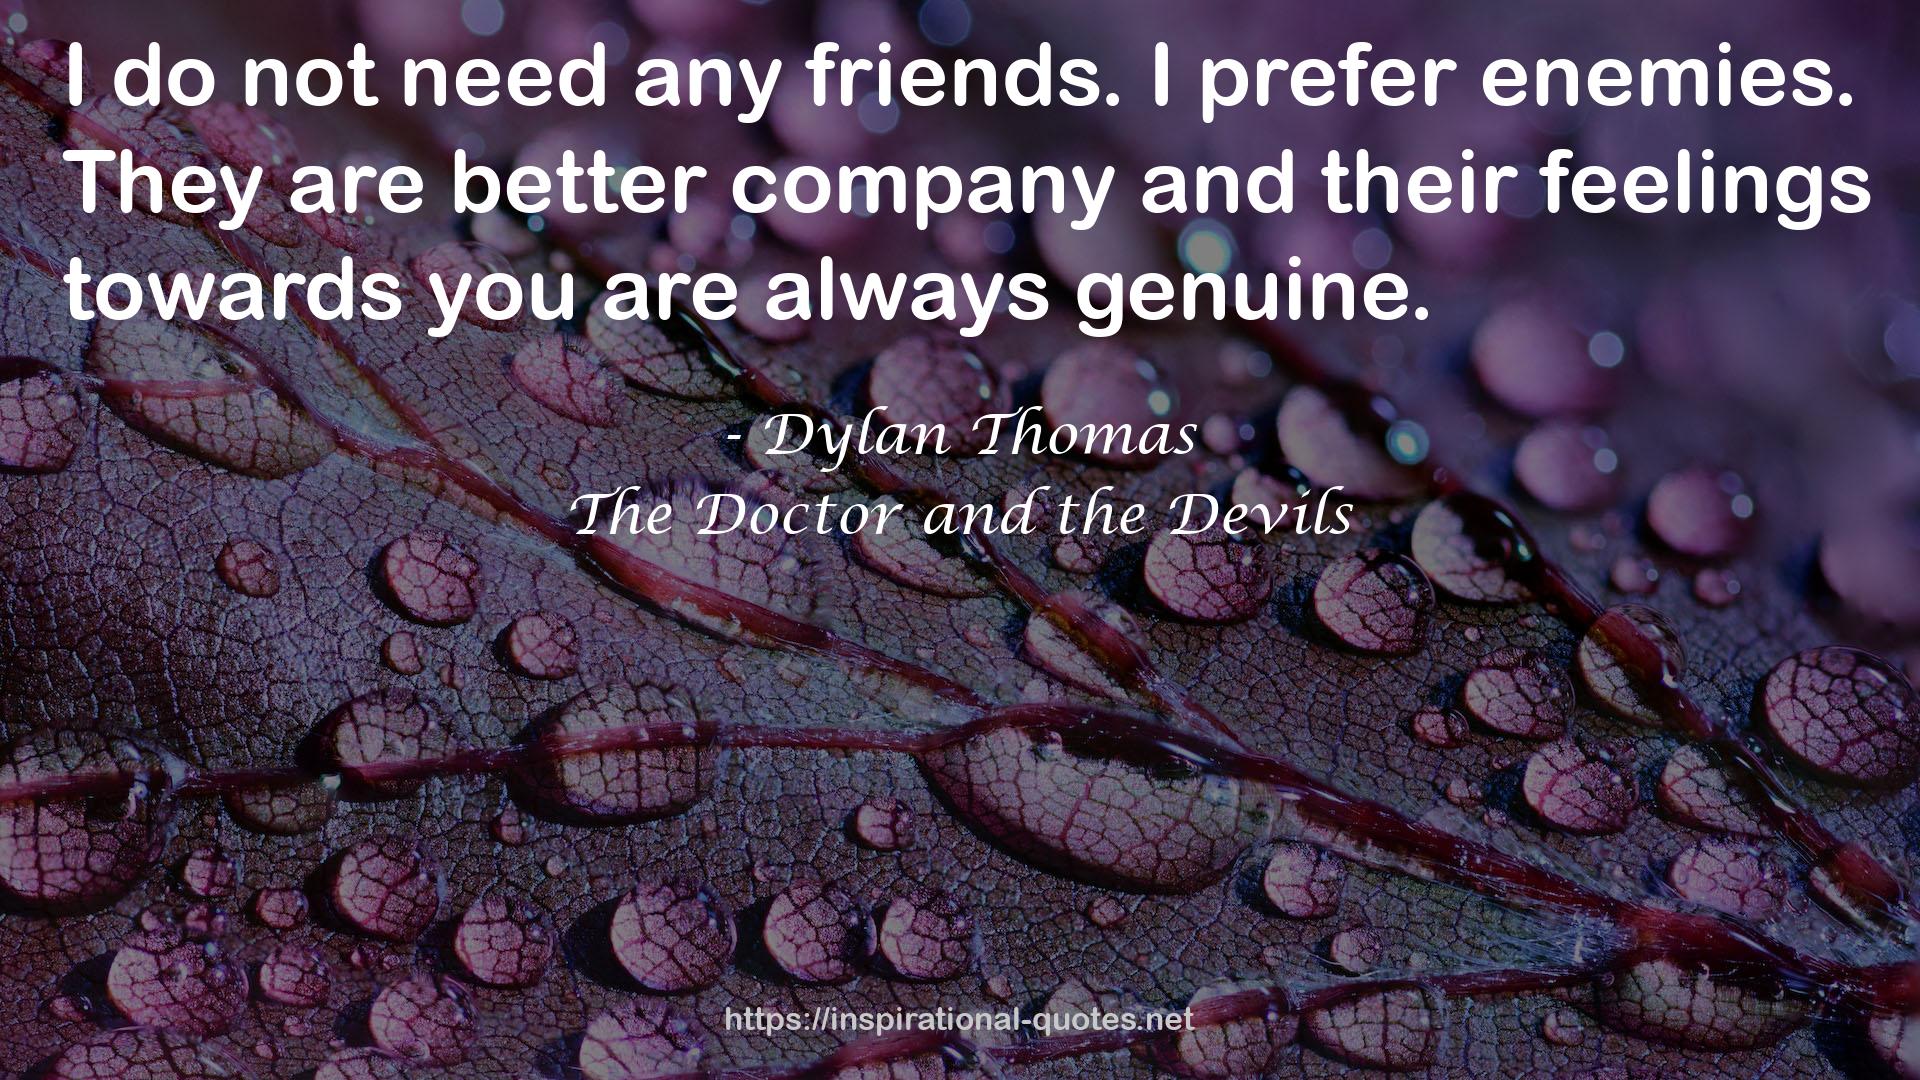 The Doctor and the Devils QUOTES